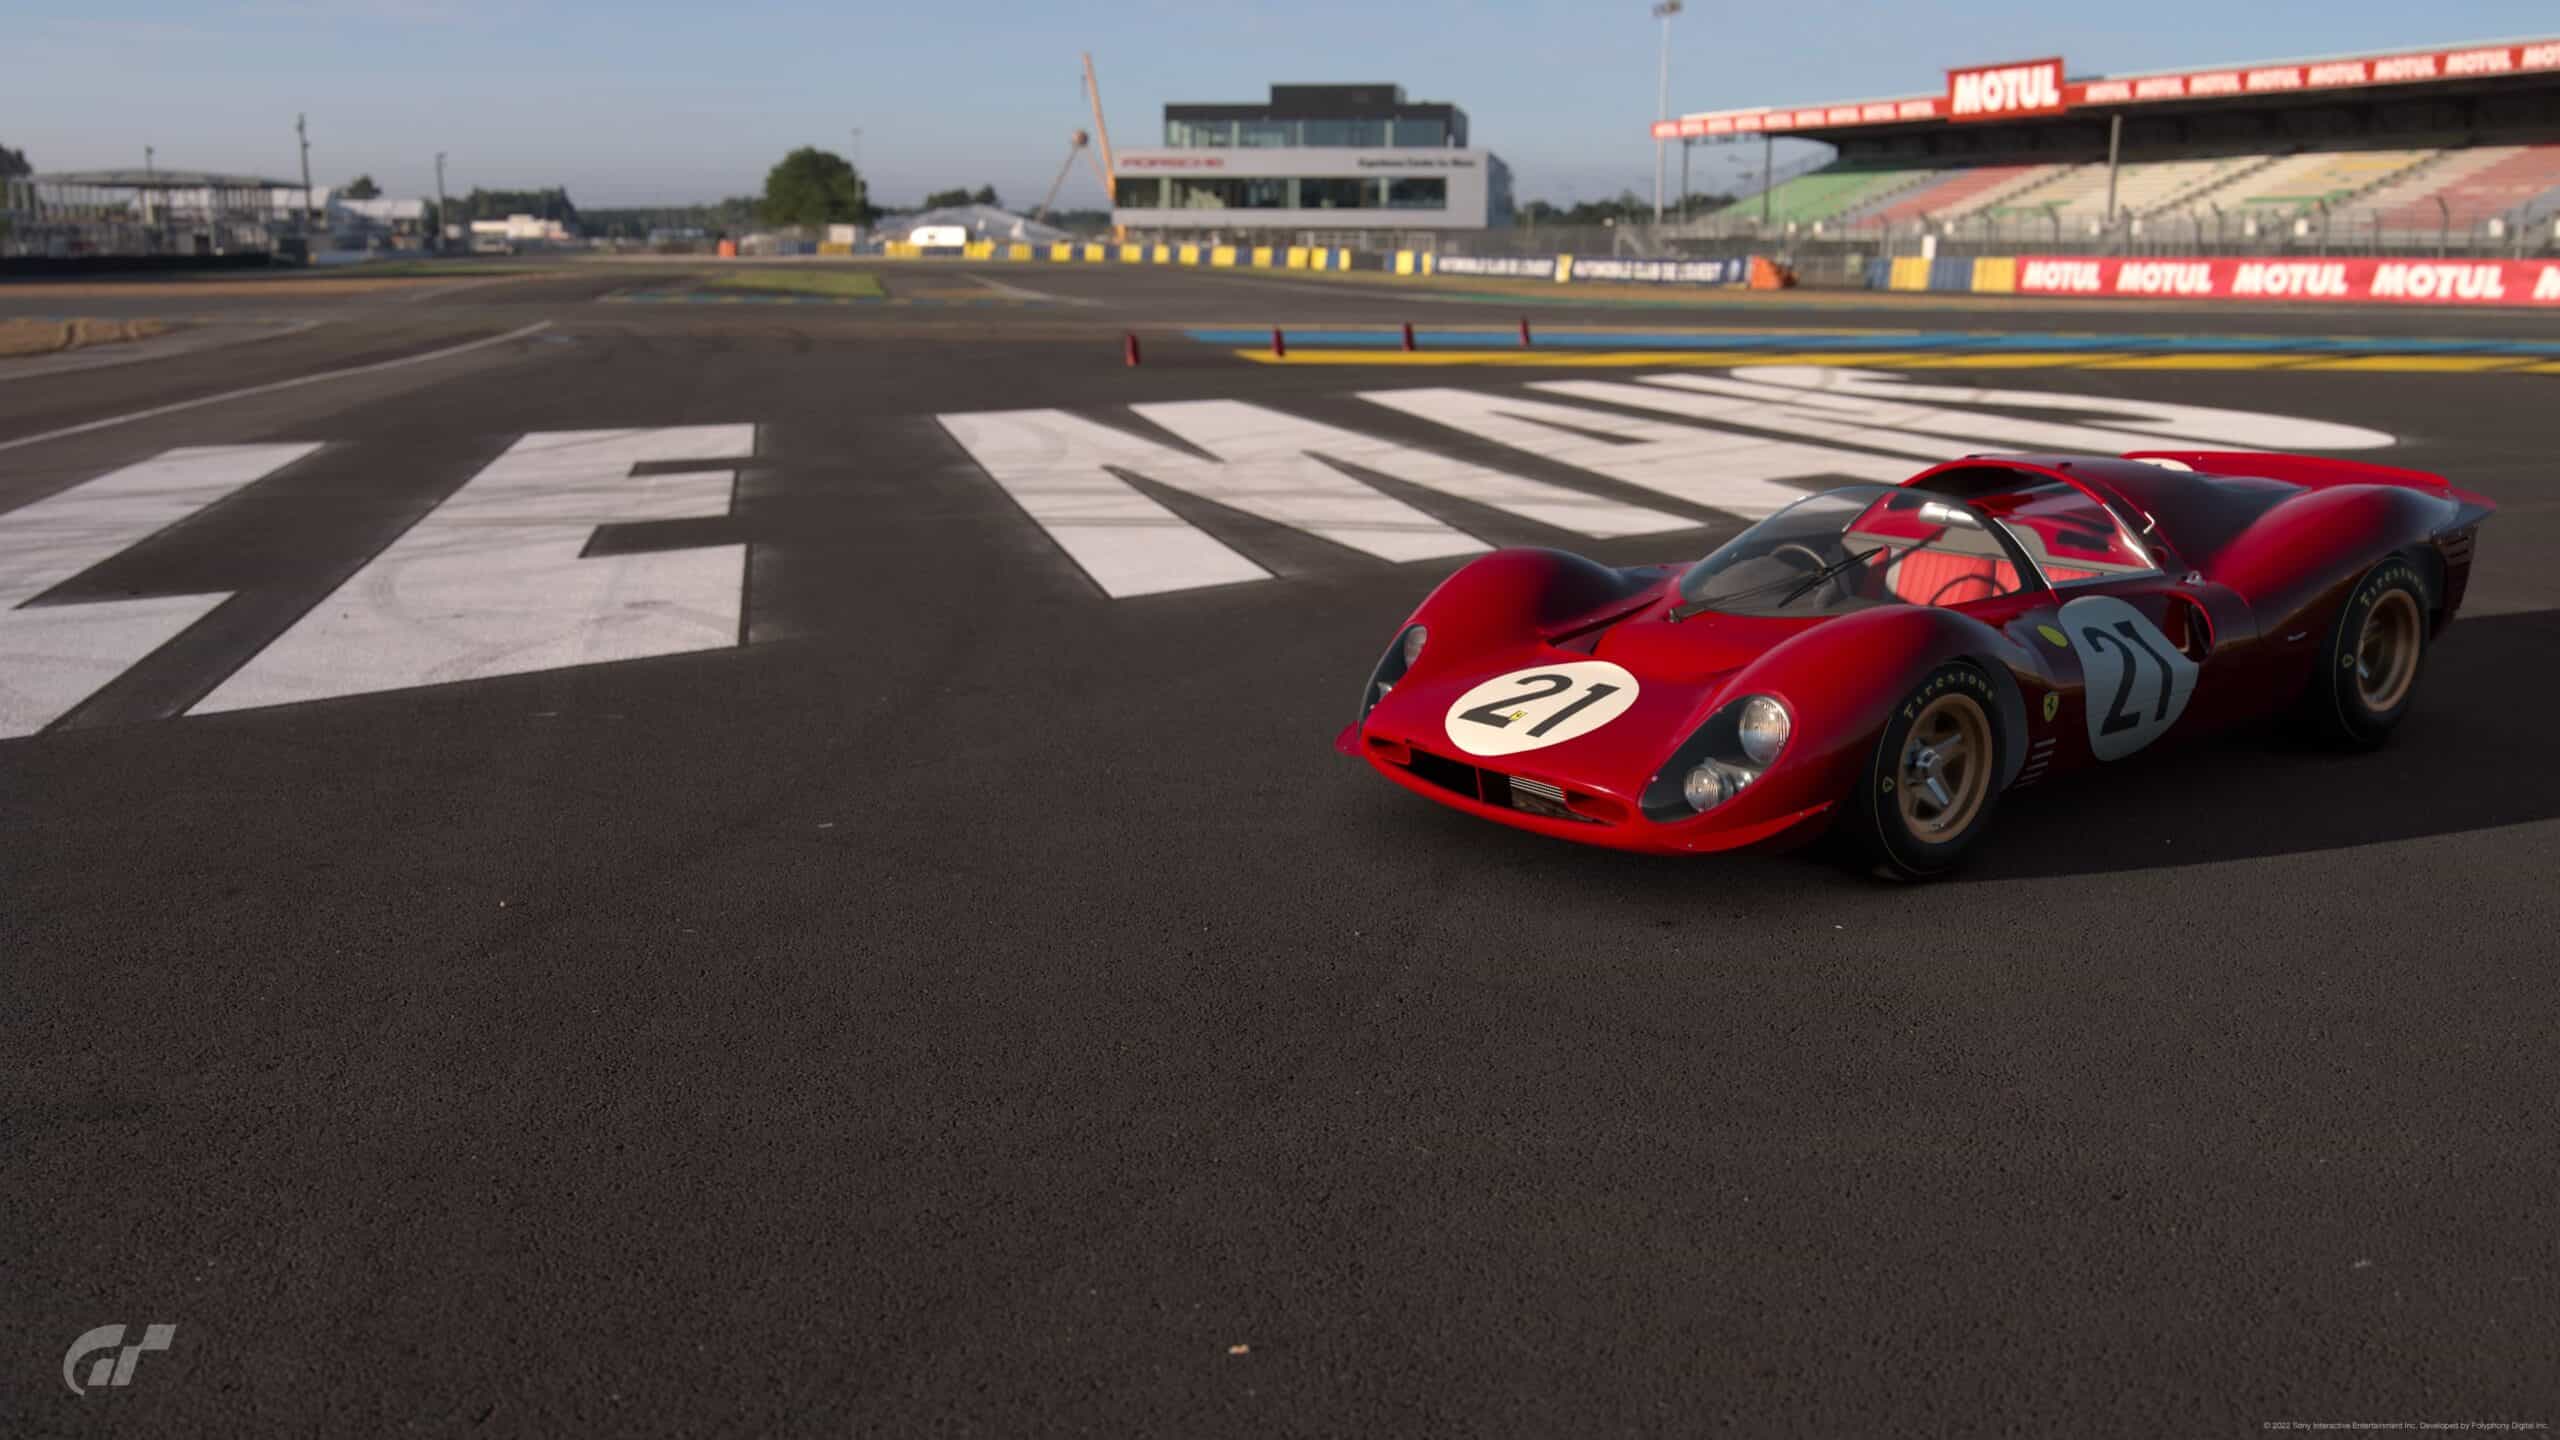 Gran Turismo 7 track list, All iconic races and circuits confirmed